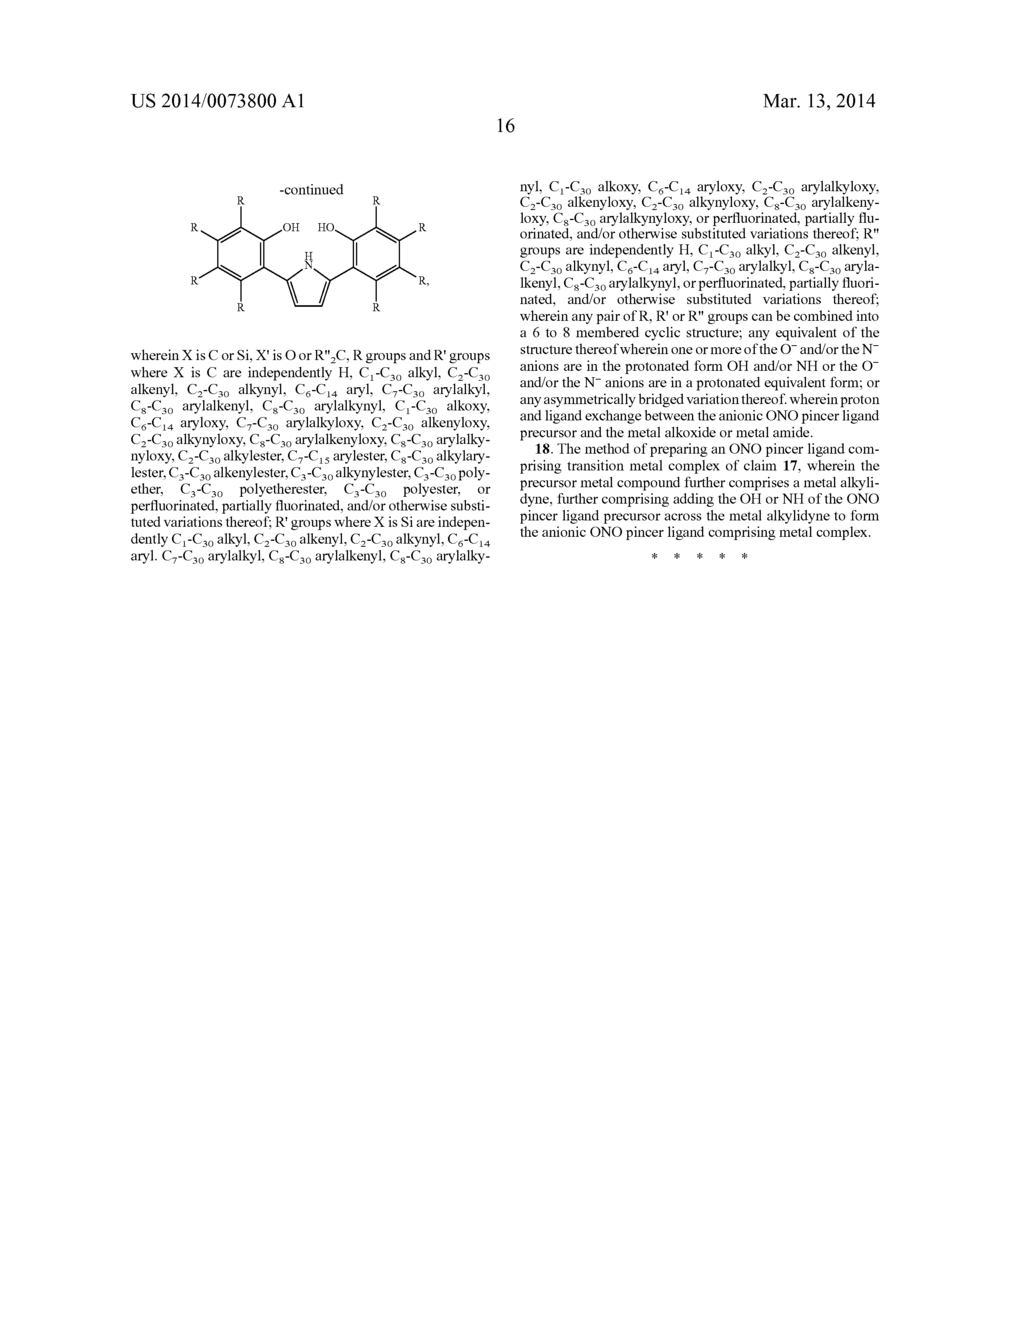 ONO PINCER LIGANDS AND ONO PINCER LIGAND COMPRISING METAL COMPLEXES - diagram, schematic, and image 66